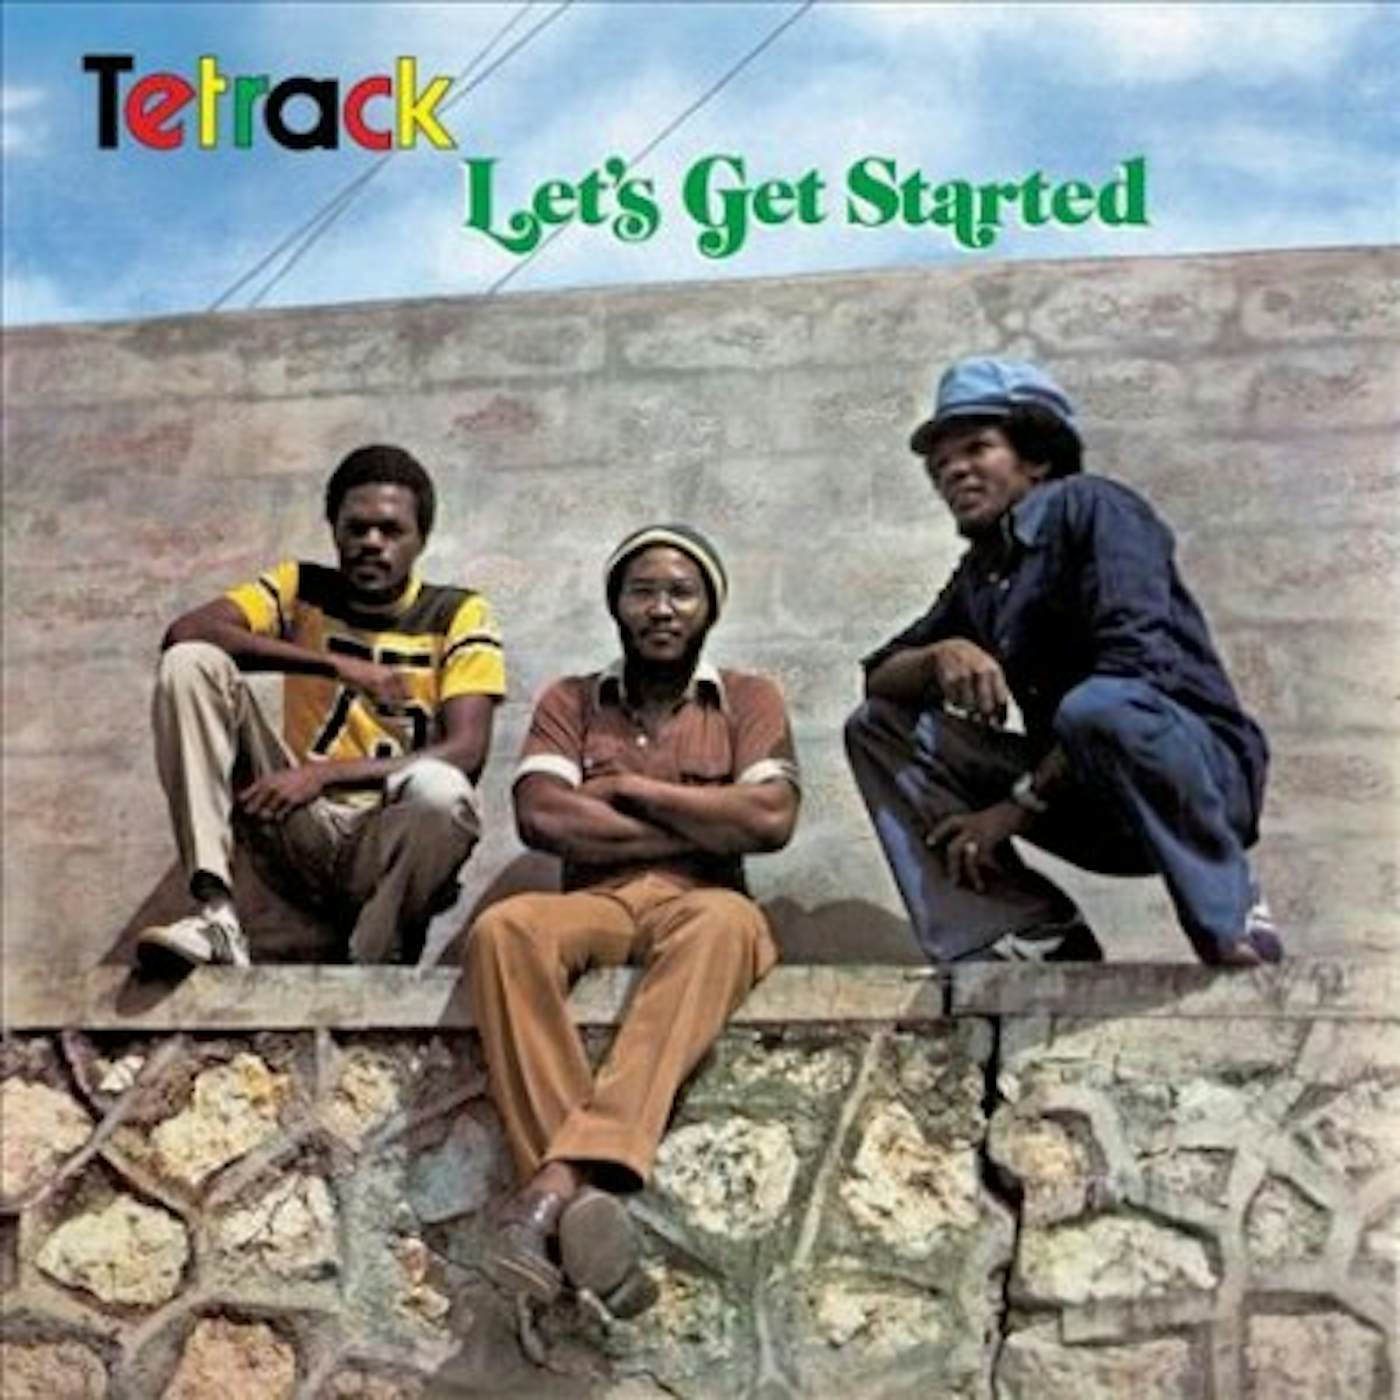 Tetrack Let's get started Vinyl Record